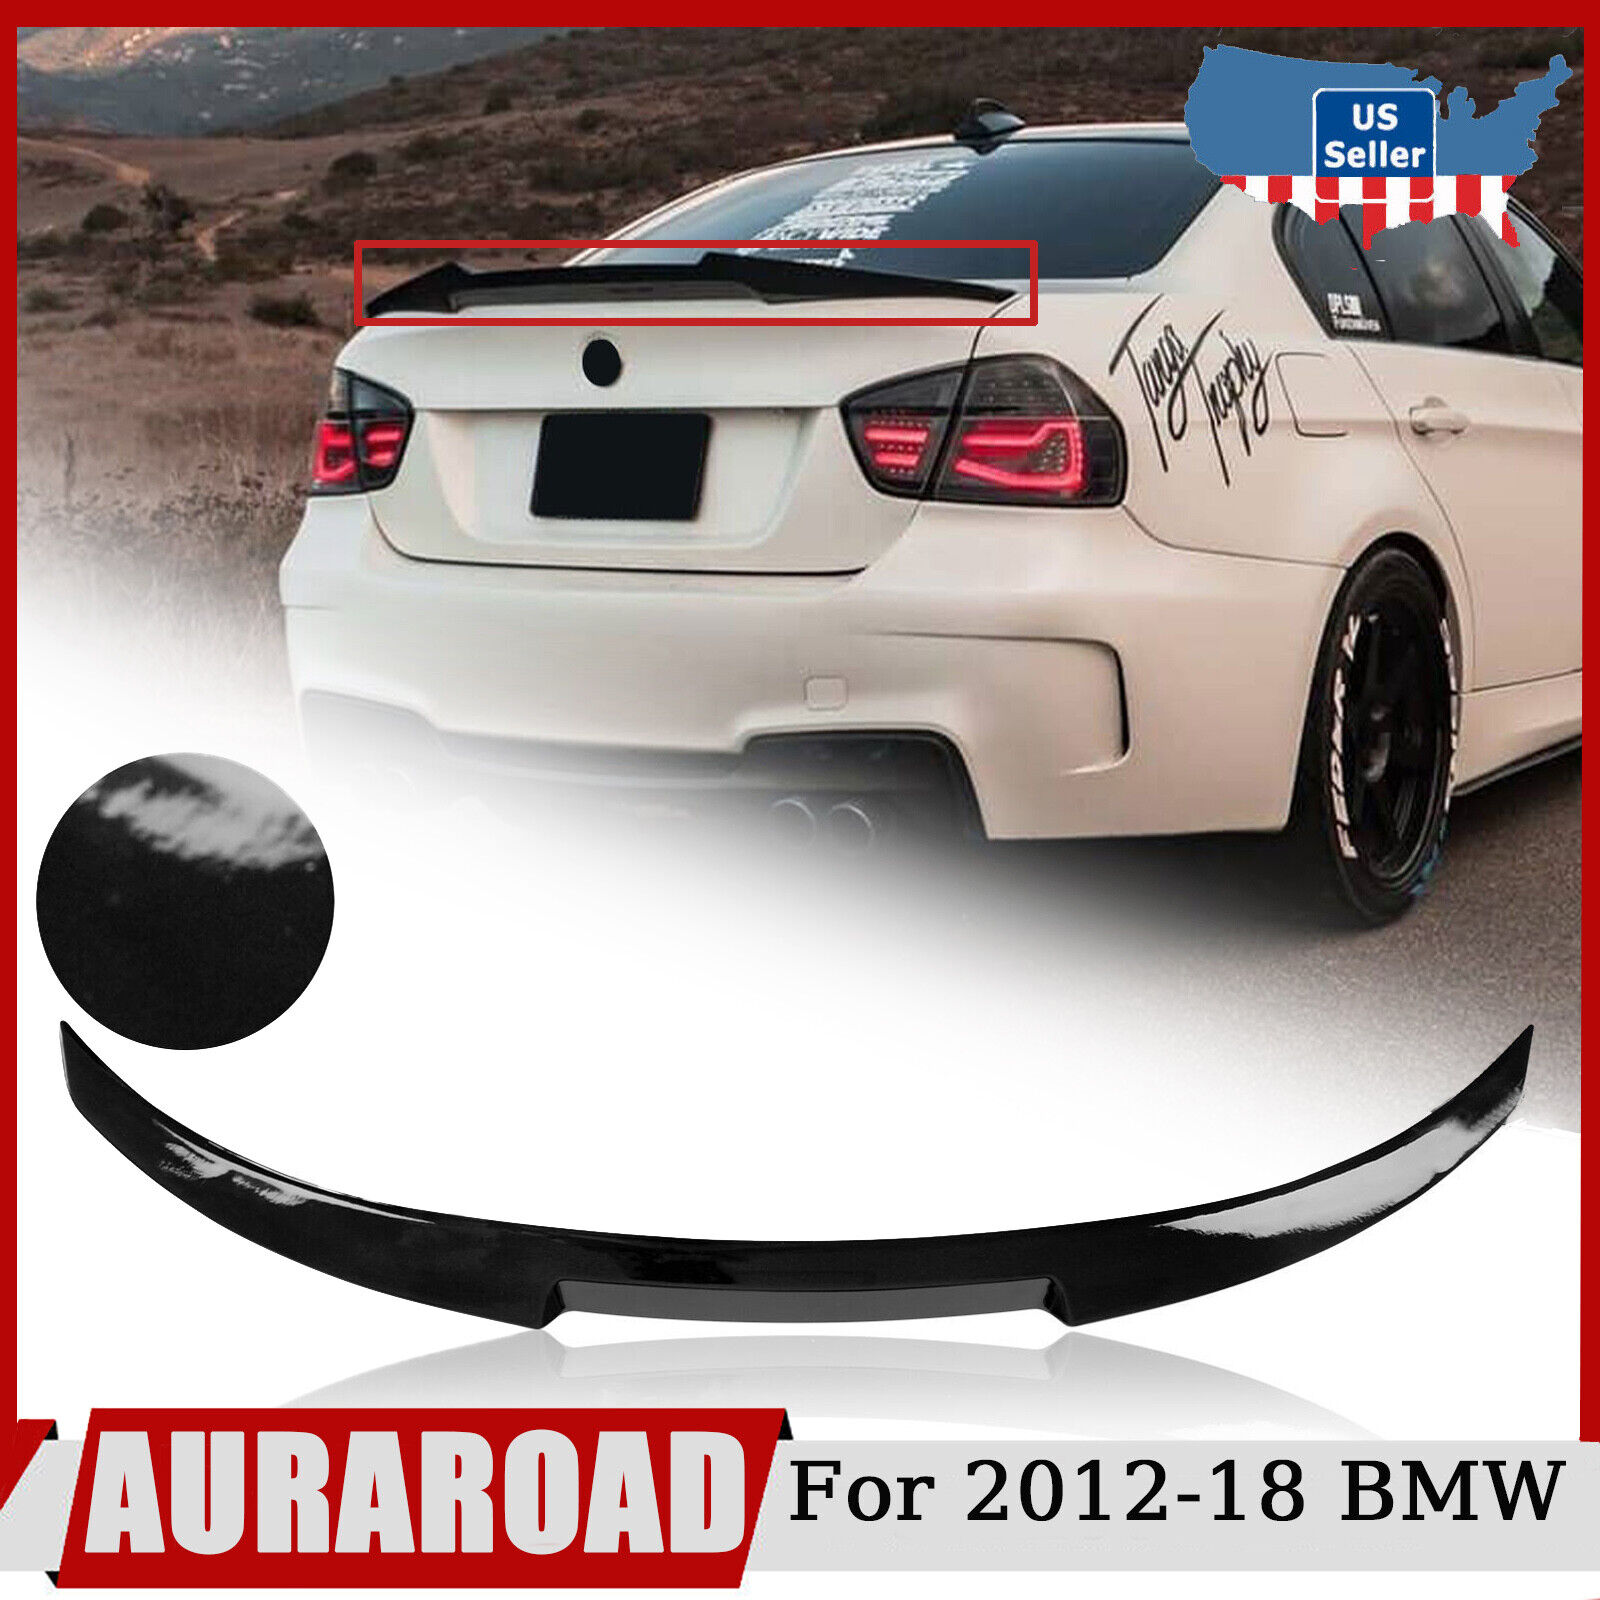 Rear Spoiler Trunk Wing For BMW E90 3 Series M3 320i 328i 335i Style Gloss Black